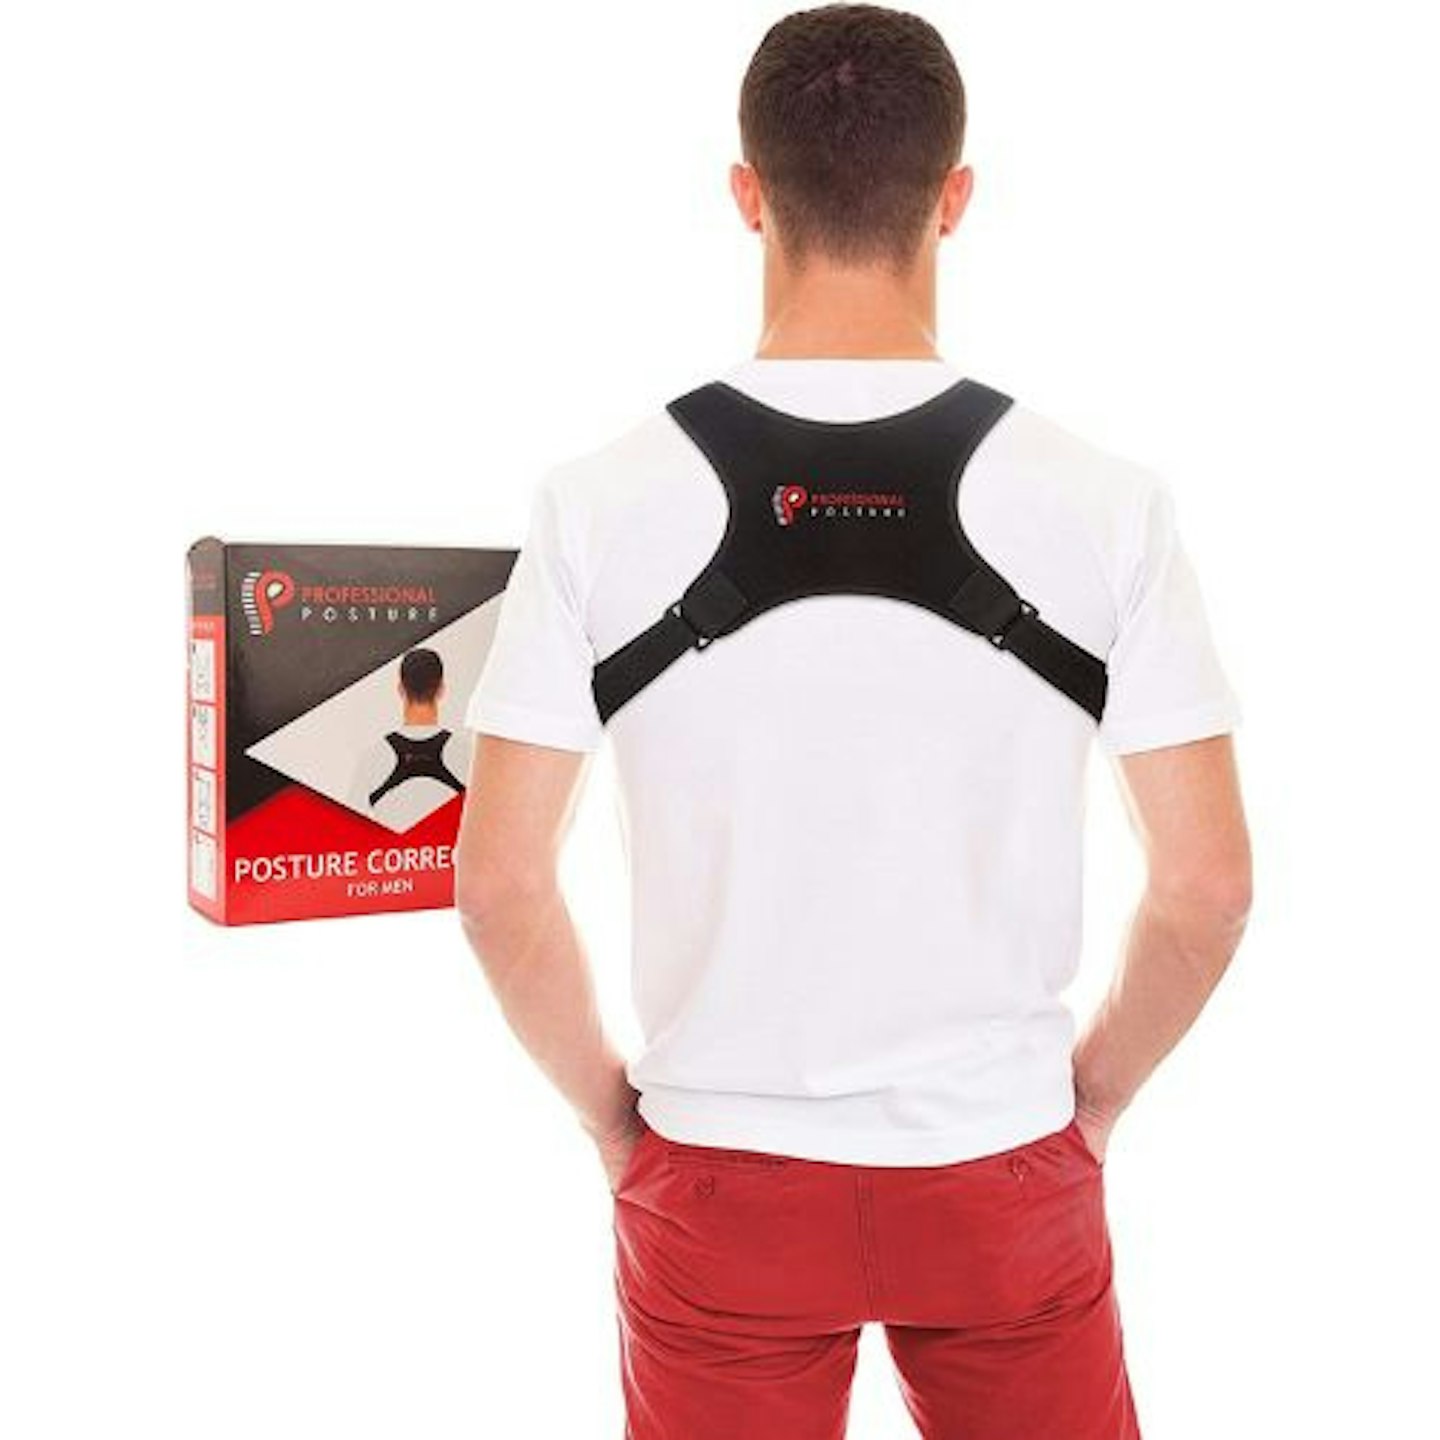 Posture Corrector For Men By Professional Posture